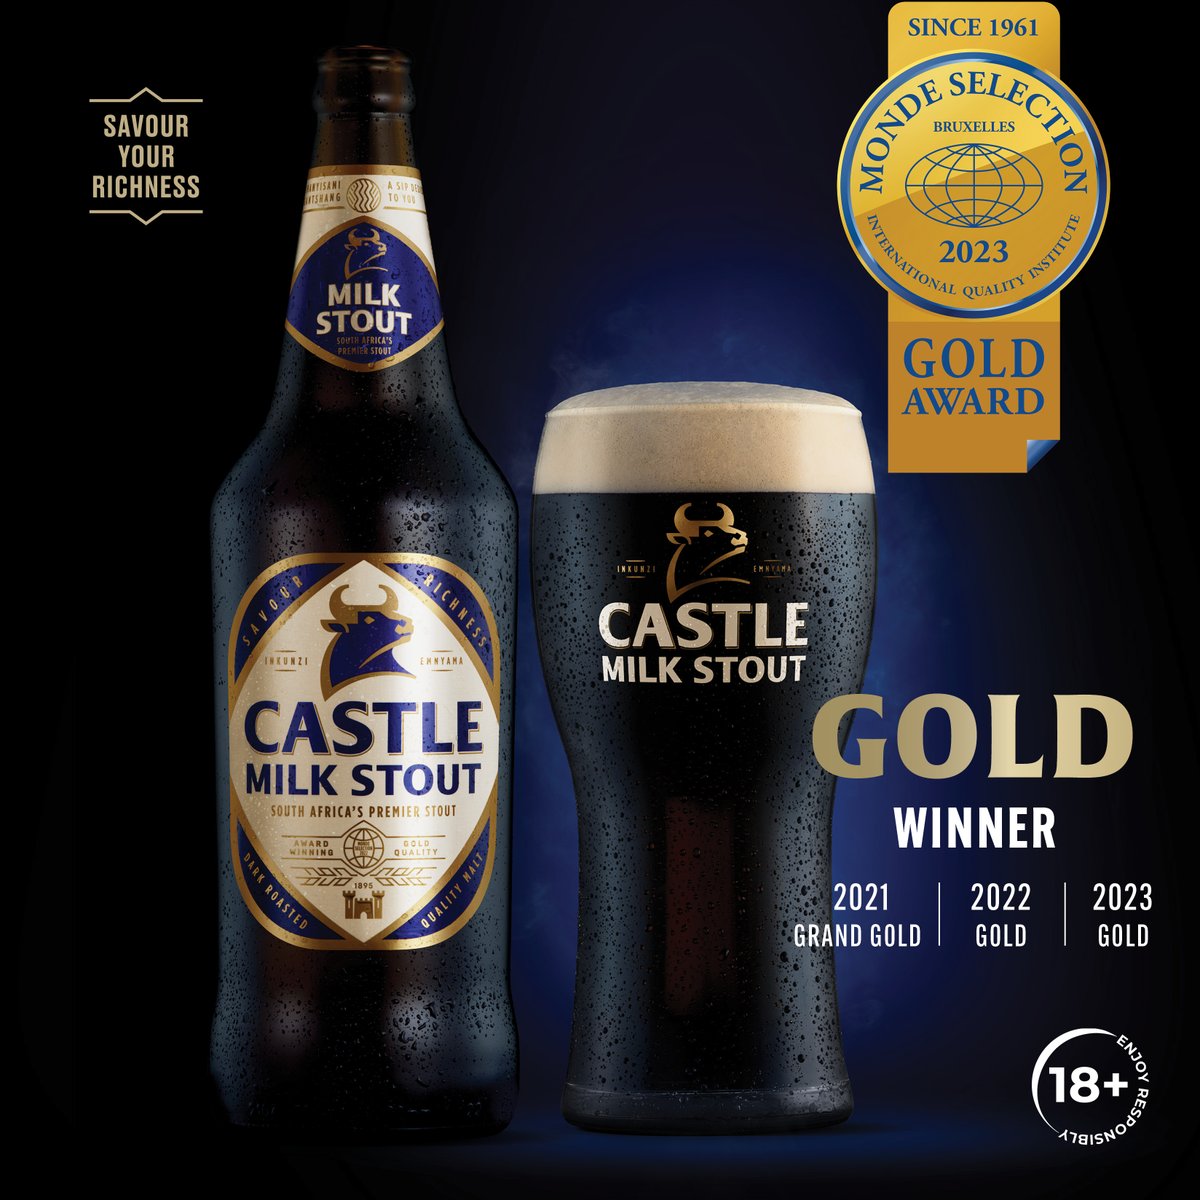 This #InternationalStoutDay we celebrate our third year of being awarded the Gold Monde Selection Award. Savour the richness of our signature, dark velvety stout to commemorate this occasion. 

Reply with what you love about #InkunziEmnyama and we could surprise you in the DM’s